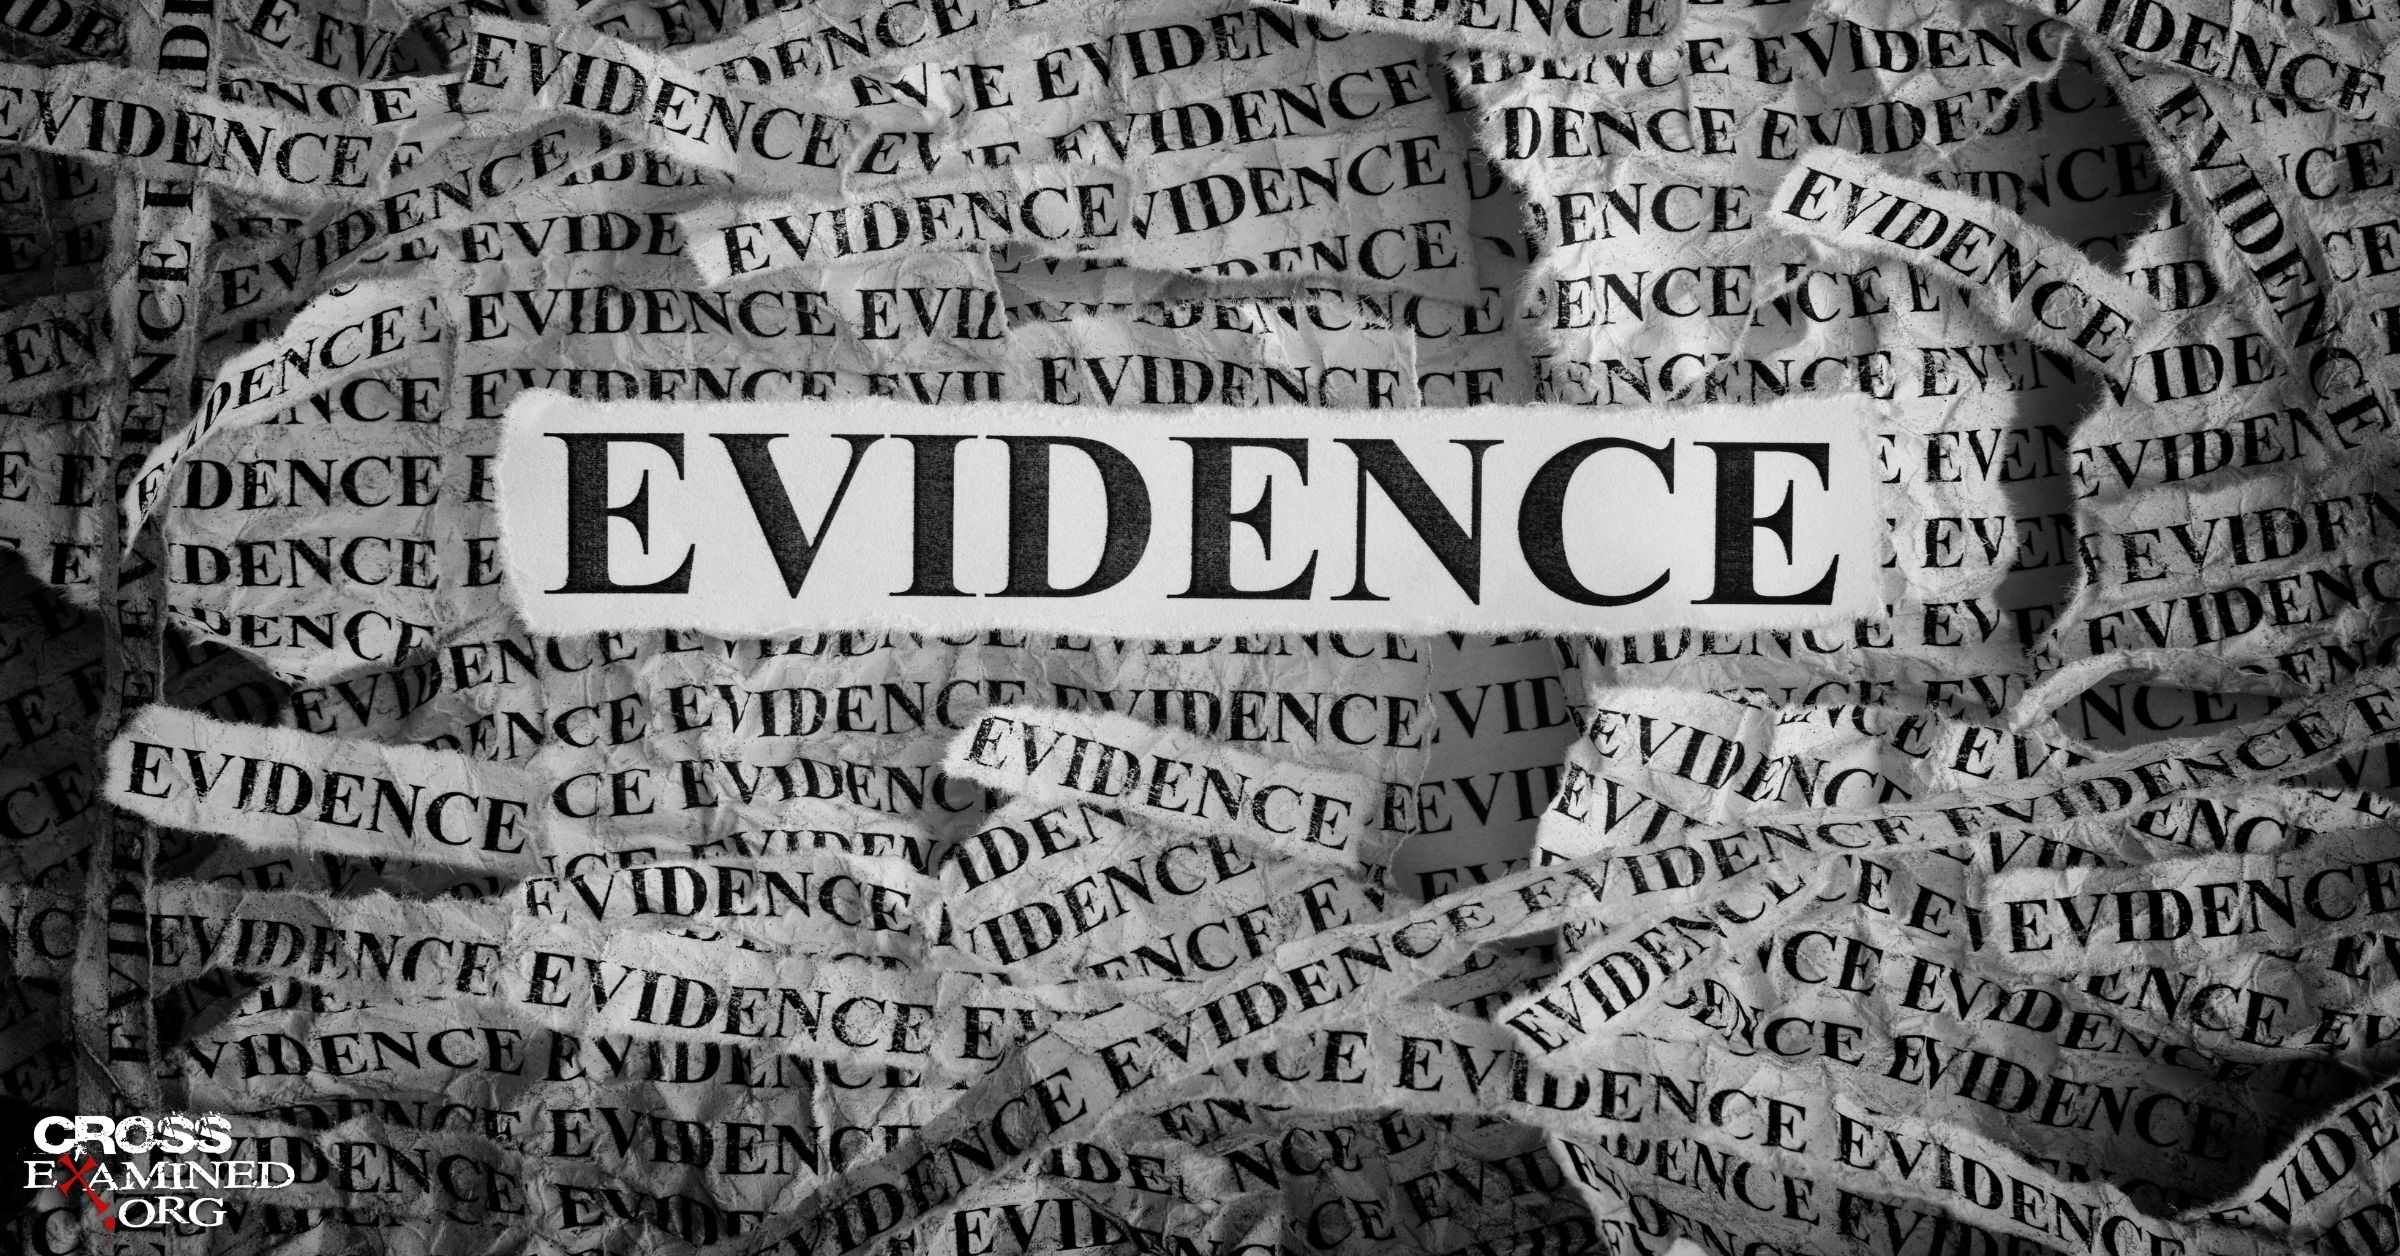 7 Independent Lines of Evidence for God’s Existence